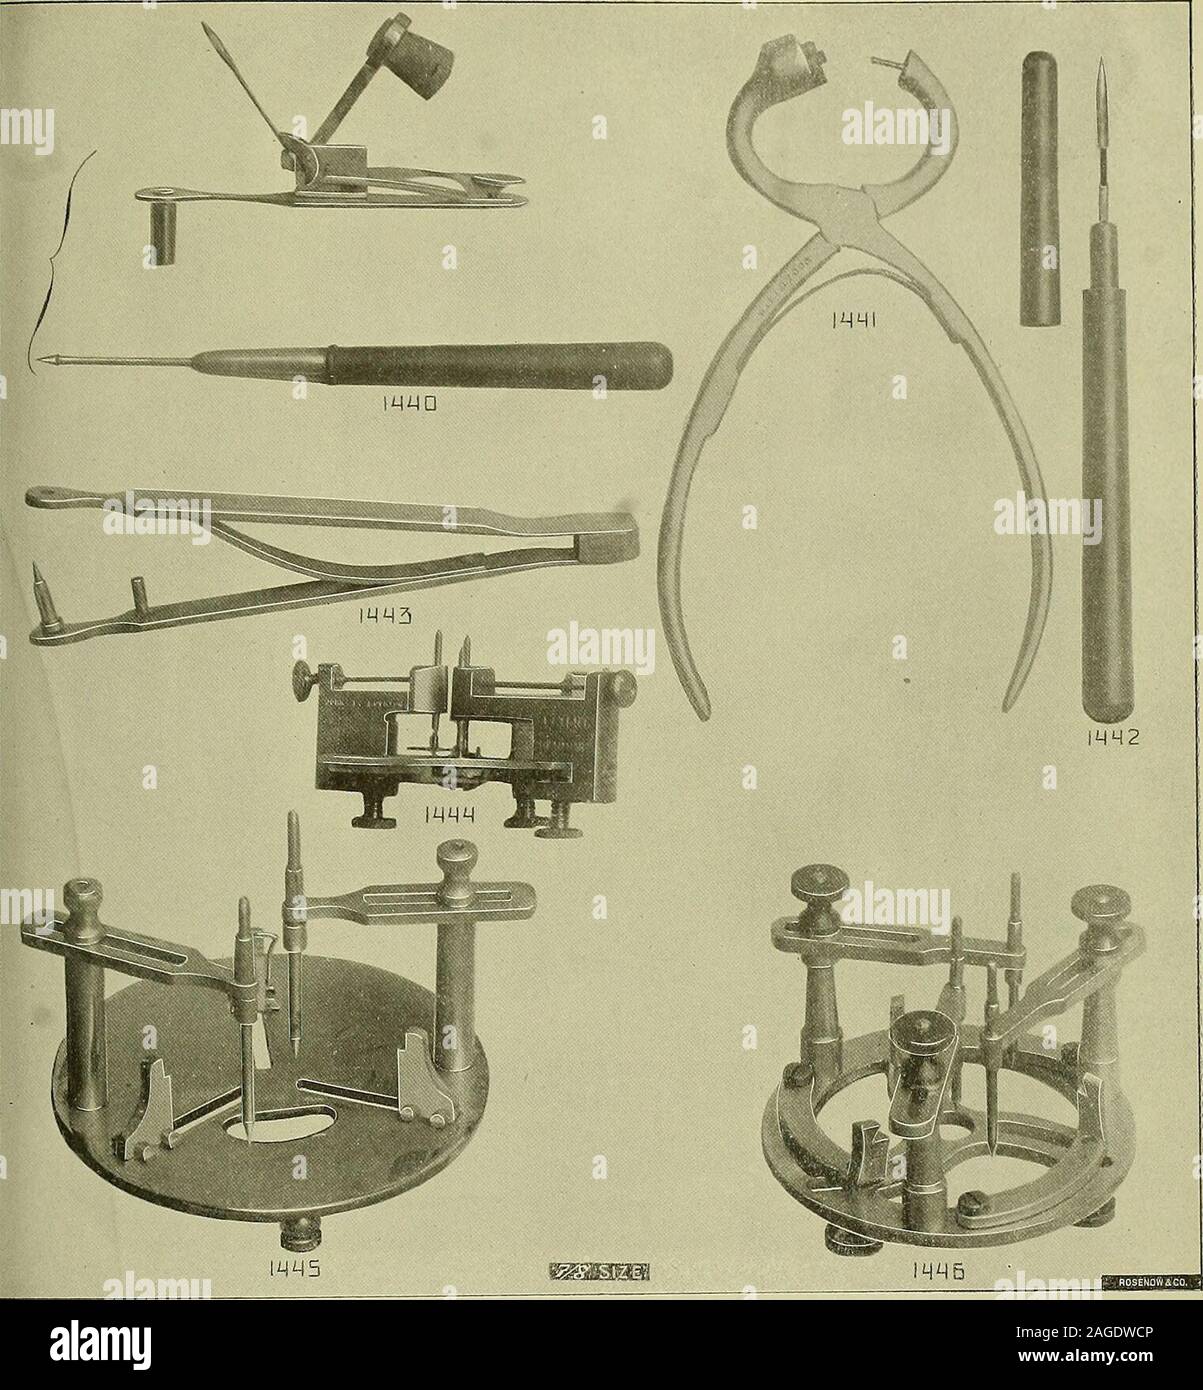 . 20th century catalogue of supplies for watchmakers, jewelers and kindred trades. 1352 1353 1355 1356 ESEoai D DRILLS. No. 134). Improved .Automatic Drill, slide gives continued tion in one direction, with adjustable chuck and drills..$1.75 E.Ktra for screw driver 20 134S. .Automatic Drill, with adjustable chuclc 25 1347. Lens Drilling Outfit 2.50 1347.. •? nickel plated 3.00 1348. Drill Bow Ha , per Per do .20 134;i Drill Bow Gut Cord, per bundle 05 Per doz 15 No. 1350. Drill Bow, adjustable 1351. Whalebone Drill Bow, smail 12 Medium 15 Large 25 1352. Geared Drill, with adjustable chuck 125 Stock Photo